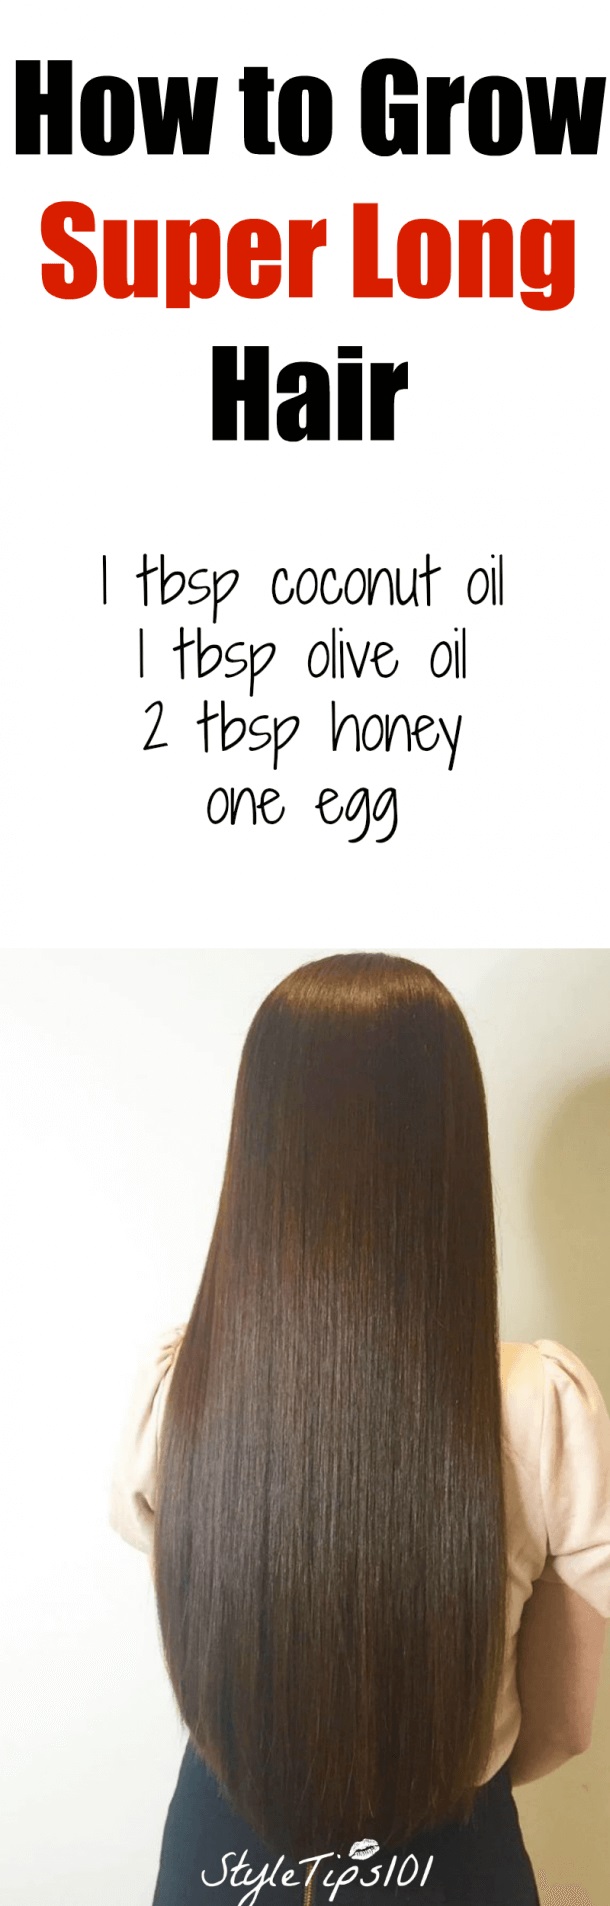 Learn how to grow super long hair the easy, most natural way! Just 4 ingredients needed and your hair will start growing quicker than anything!